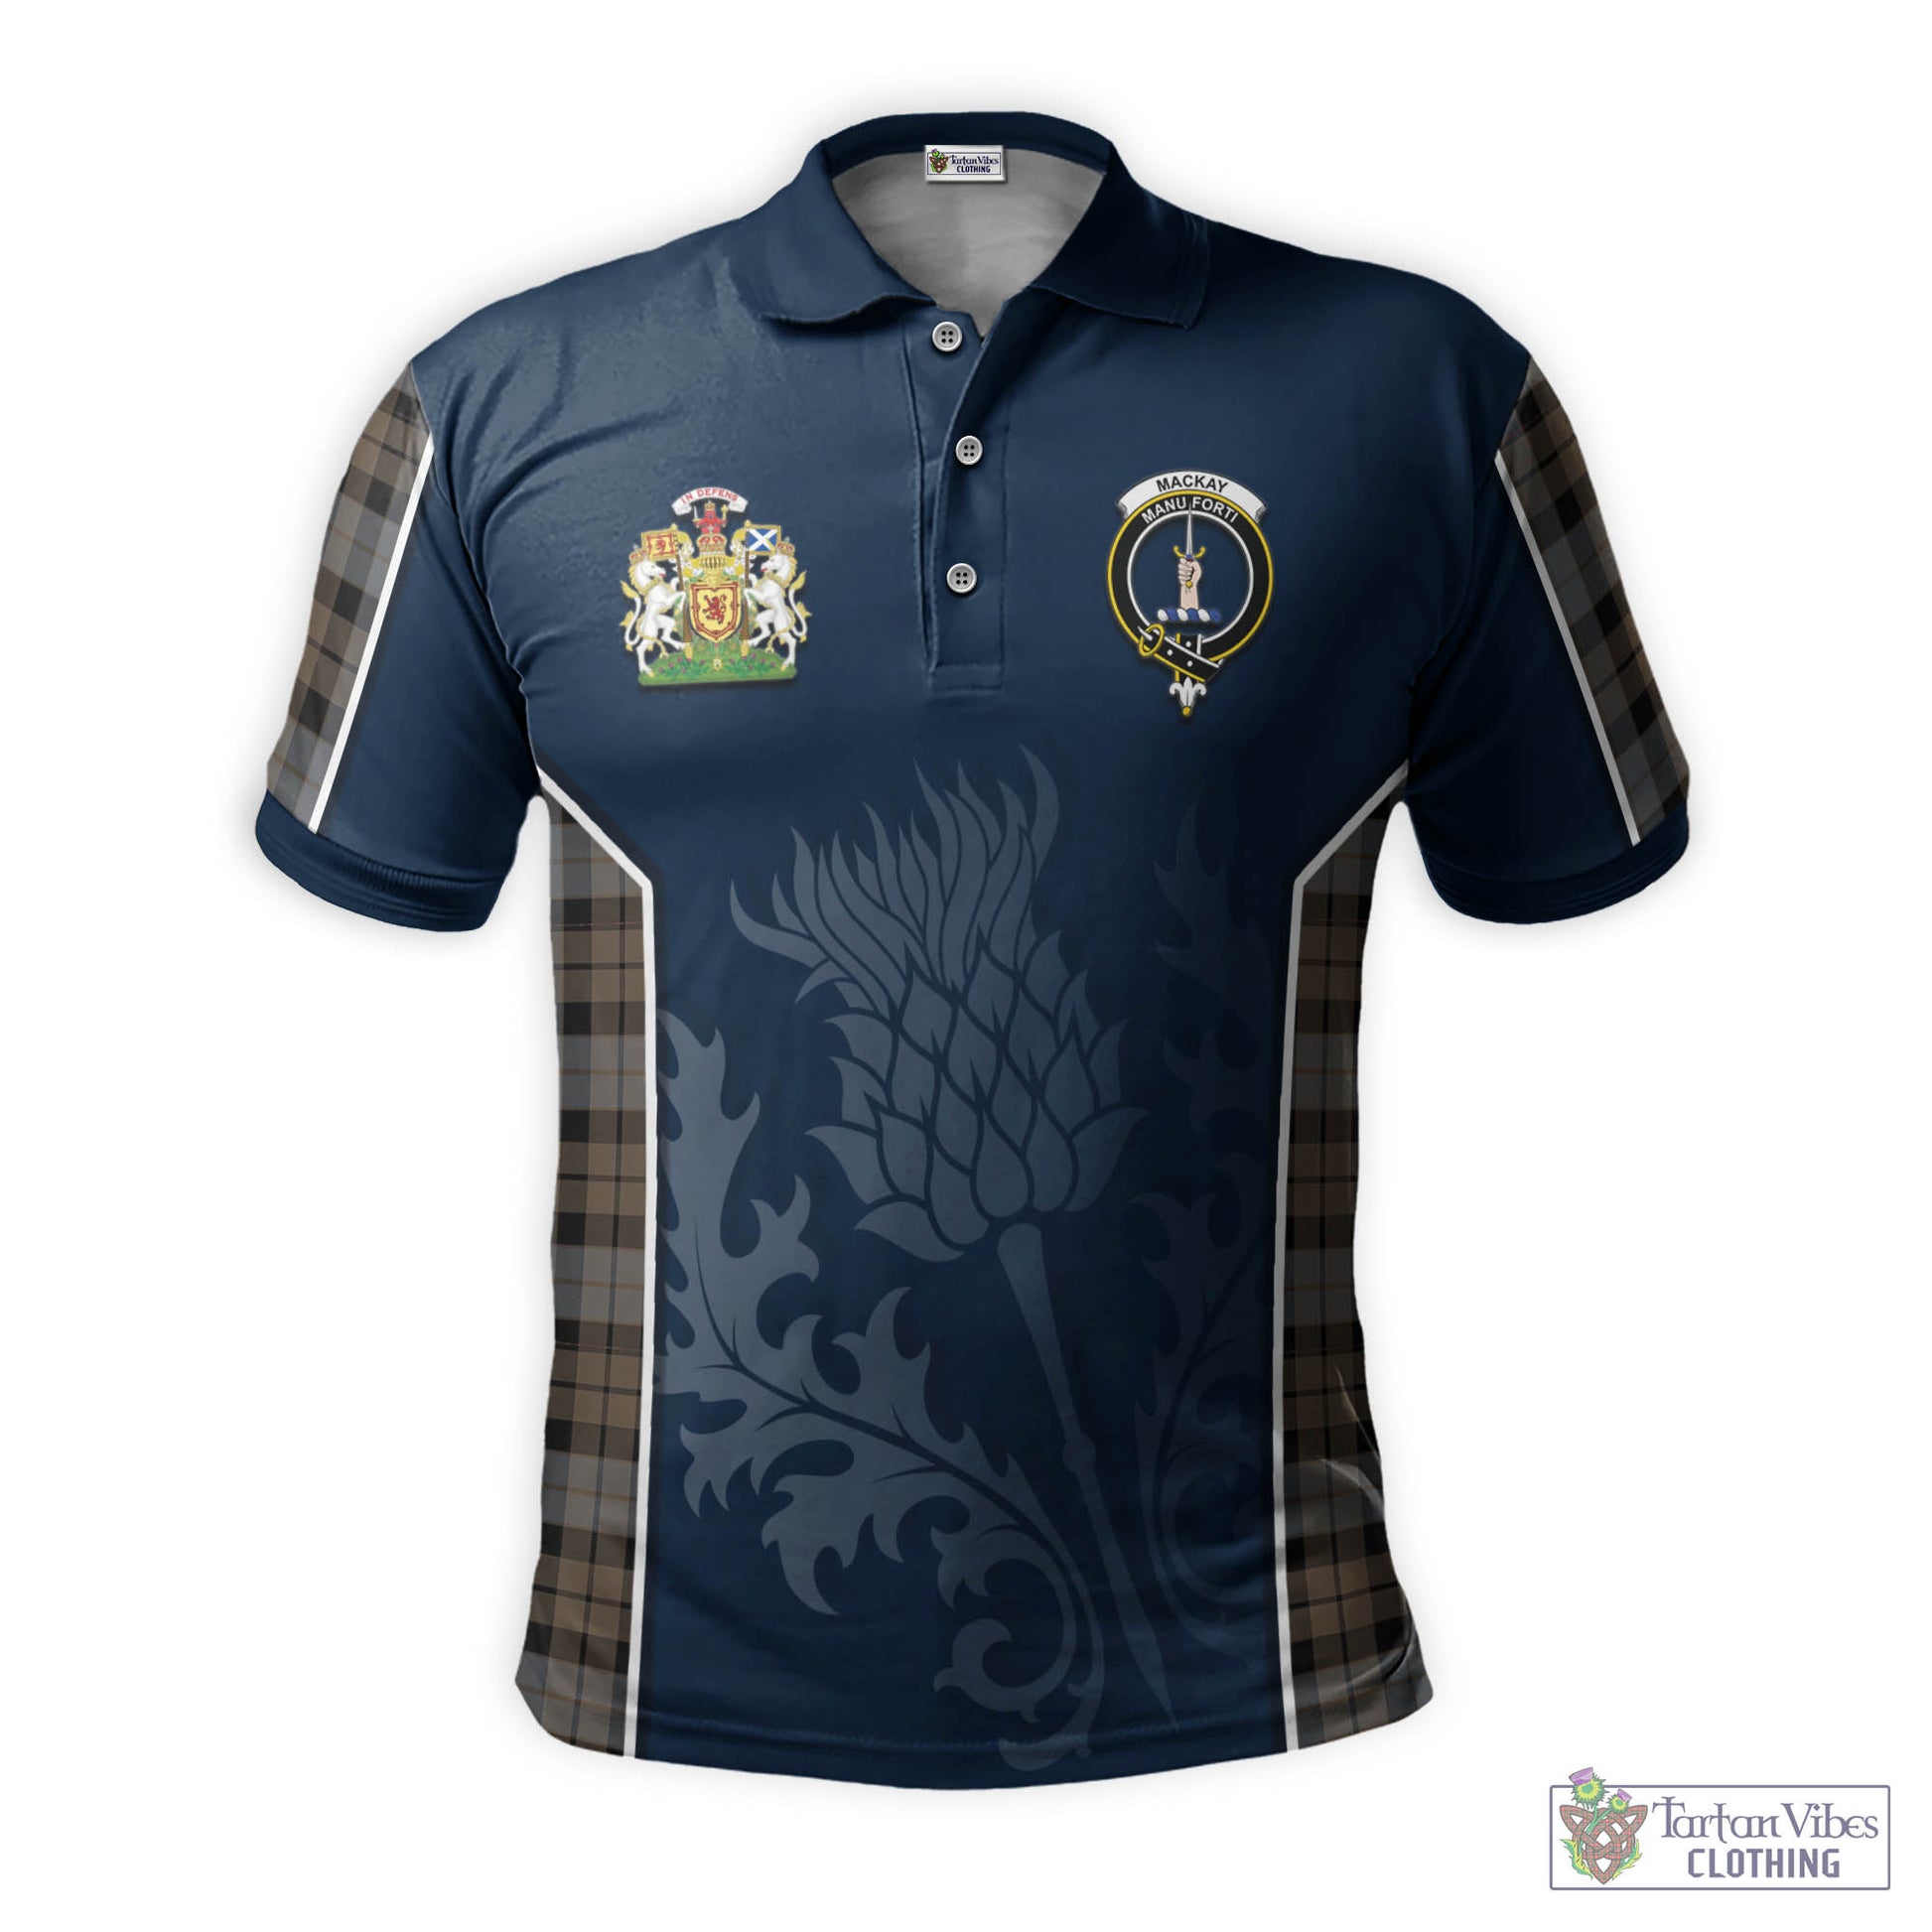 Tartan Vibes Clothing MacKay Weathered Tartan Men's Polo Shirt with Family Crest and Scottish Thistle Vibes Sport Style